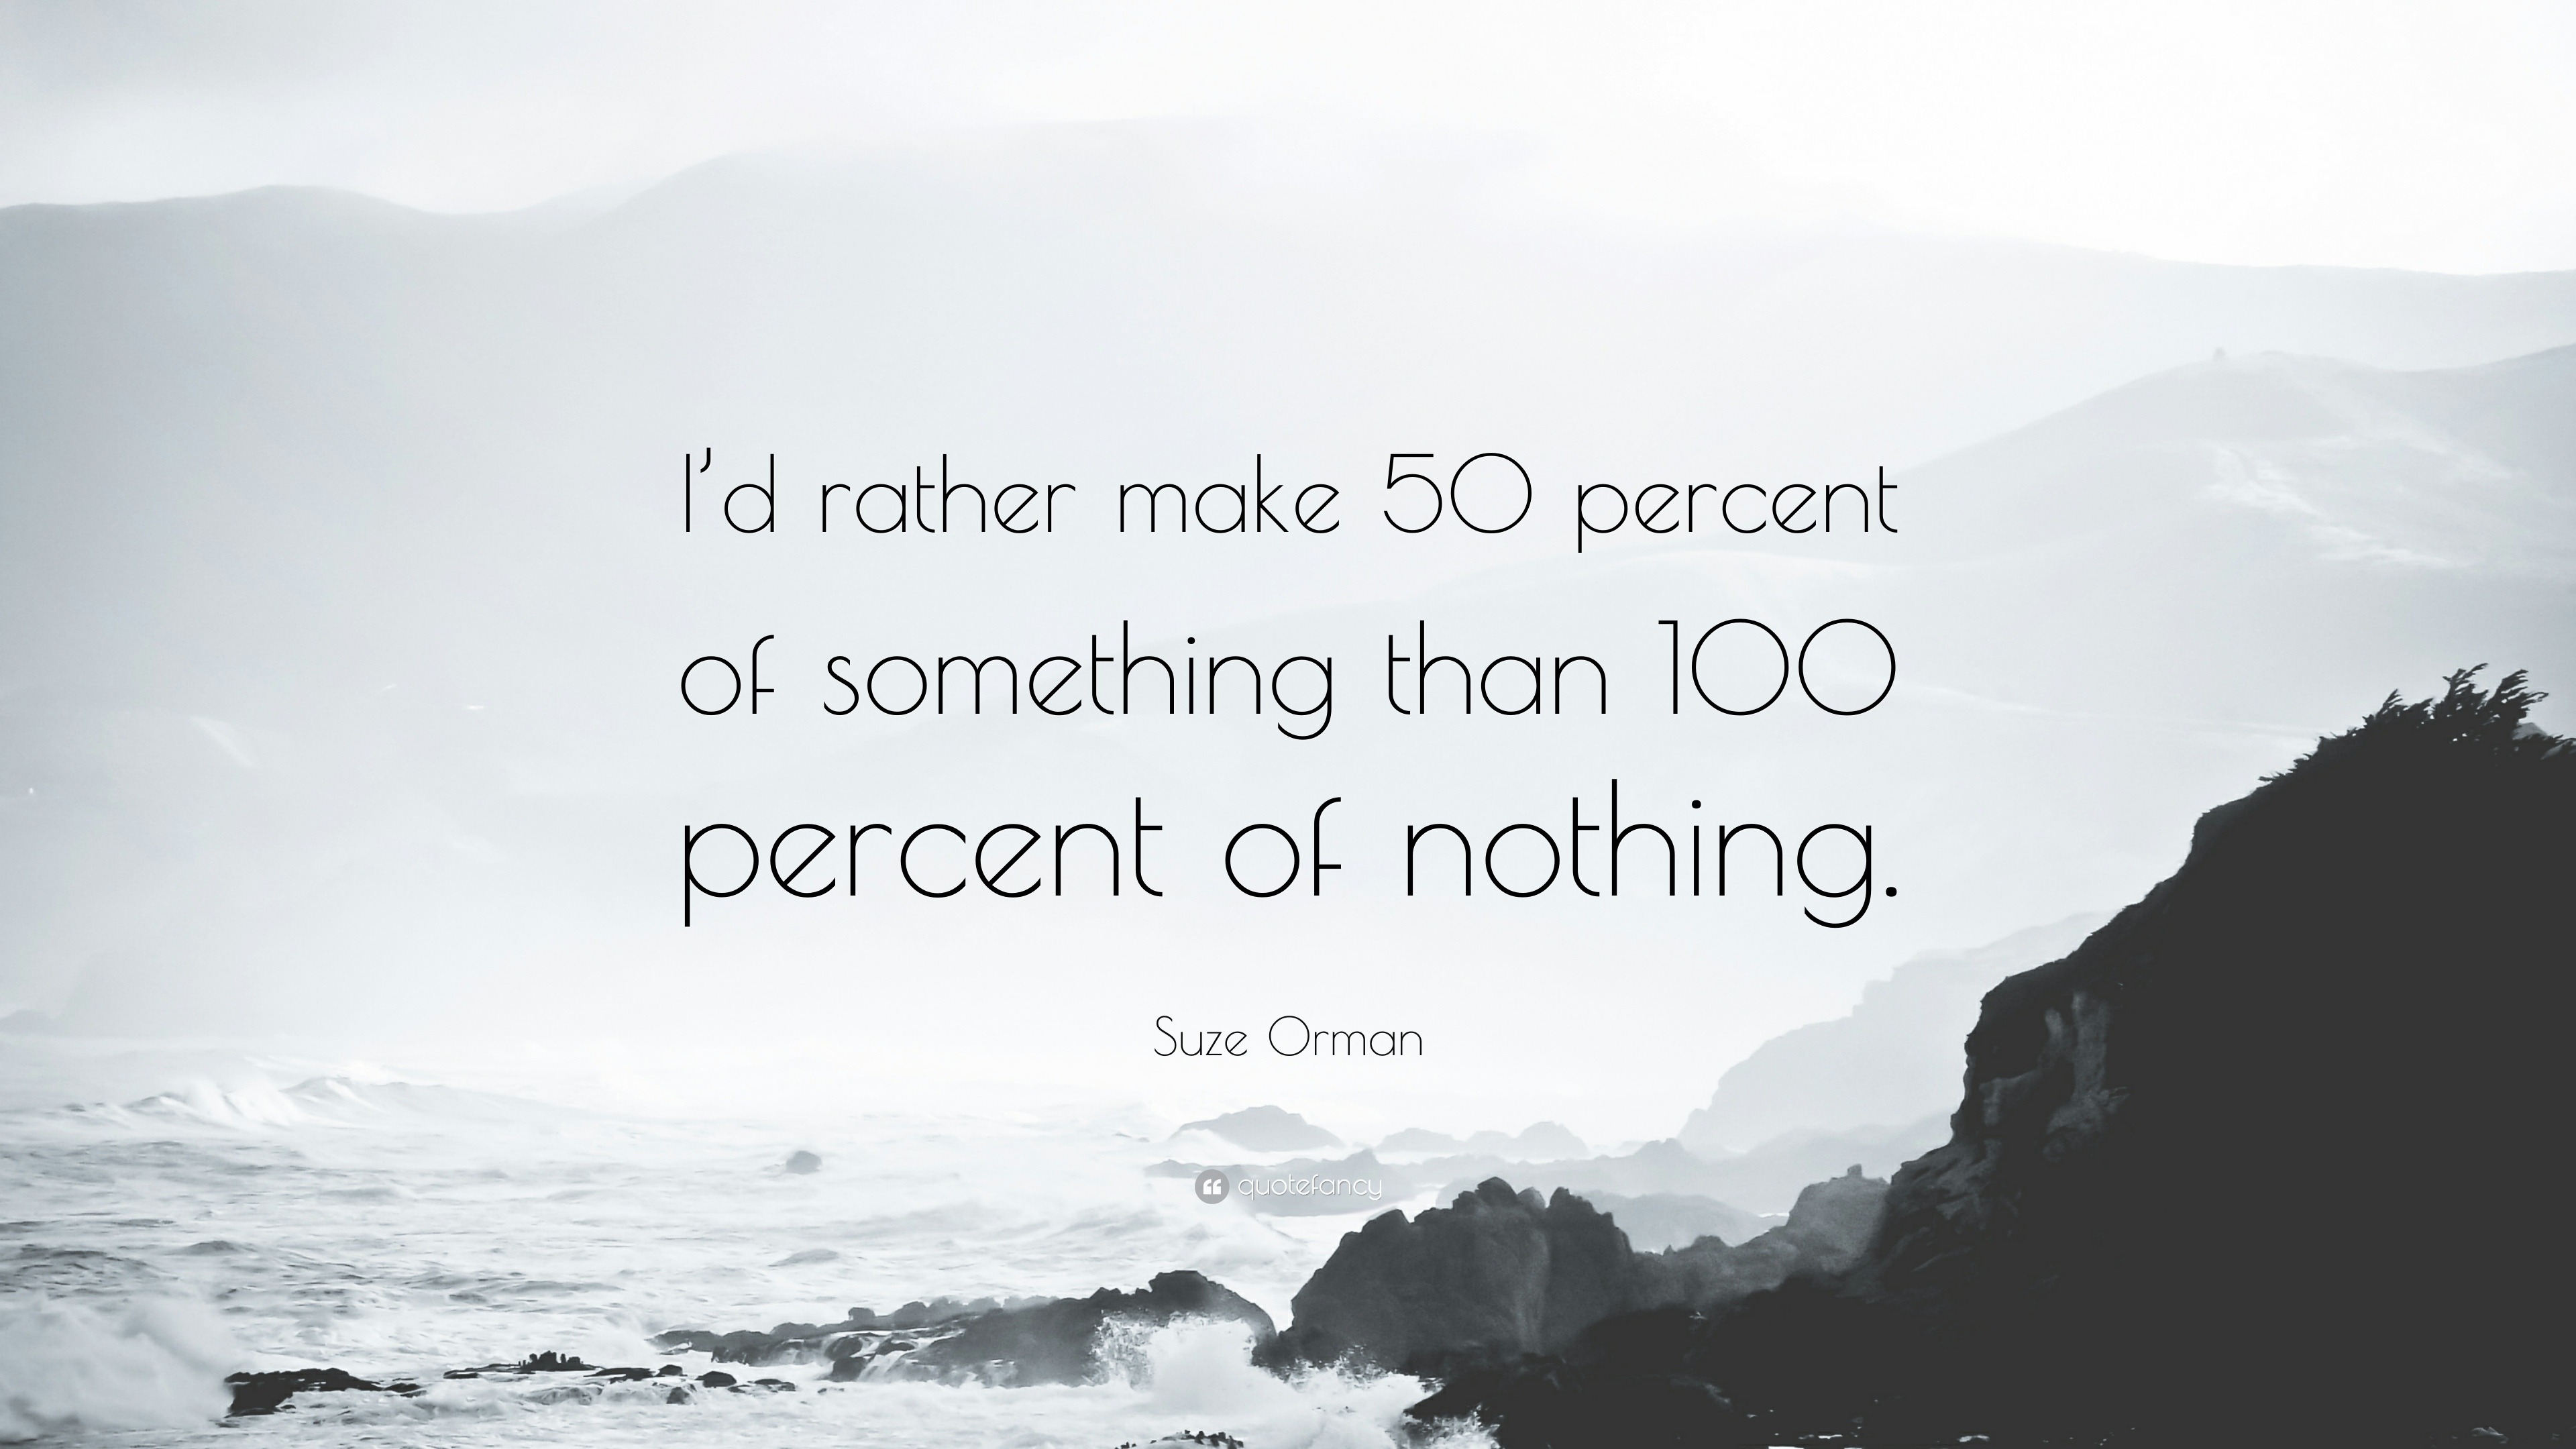 "d rather make DO percent
of something than 100

percent of nothing.

 
    

Suze Orman